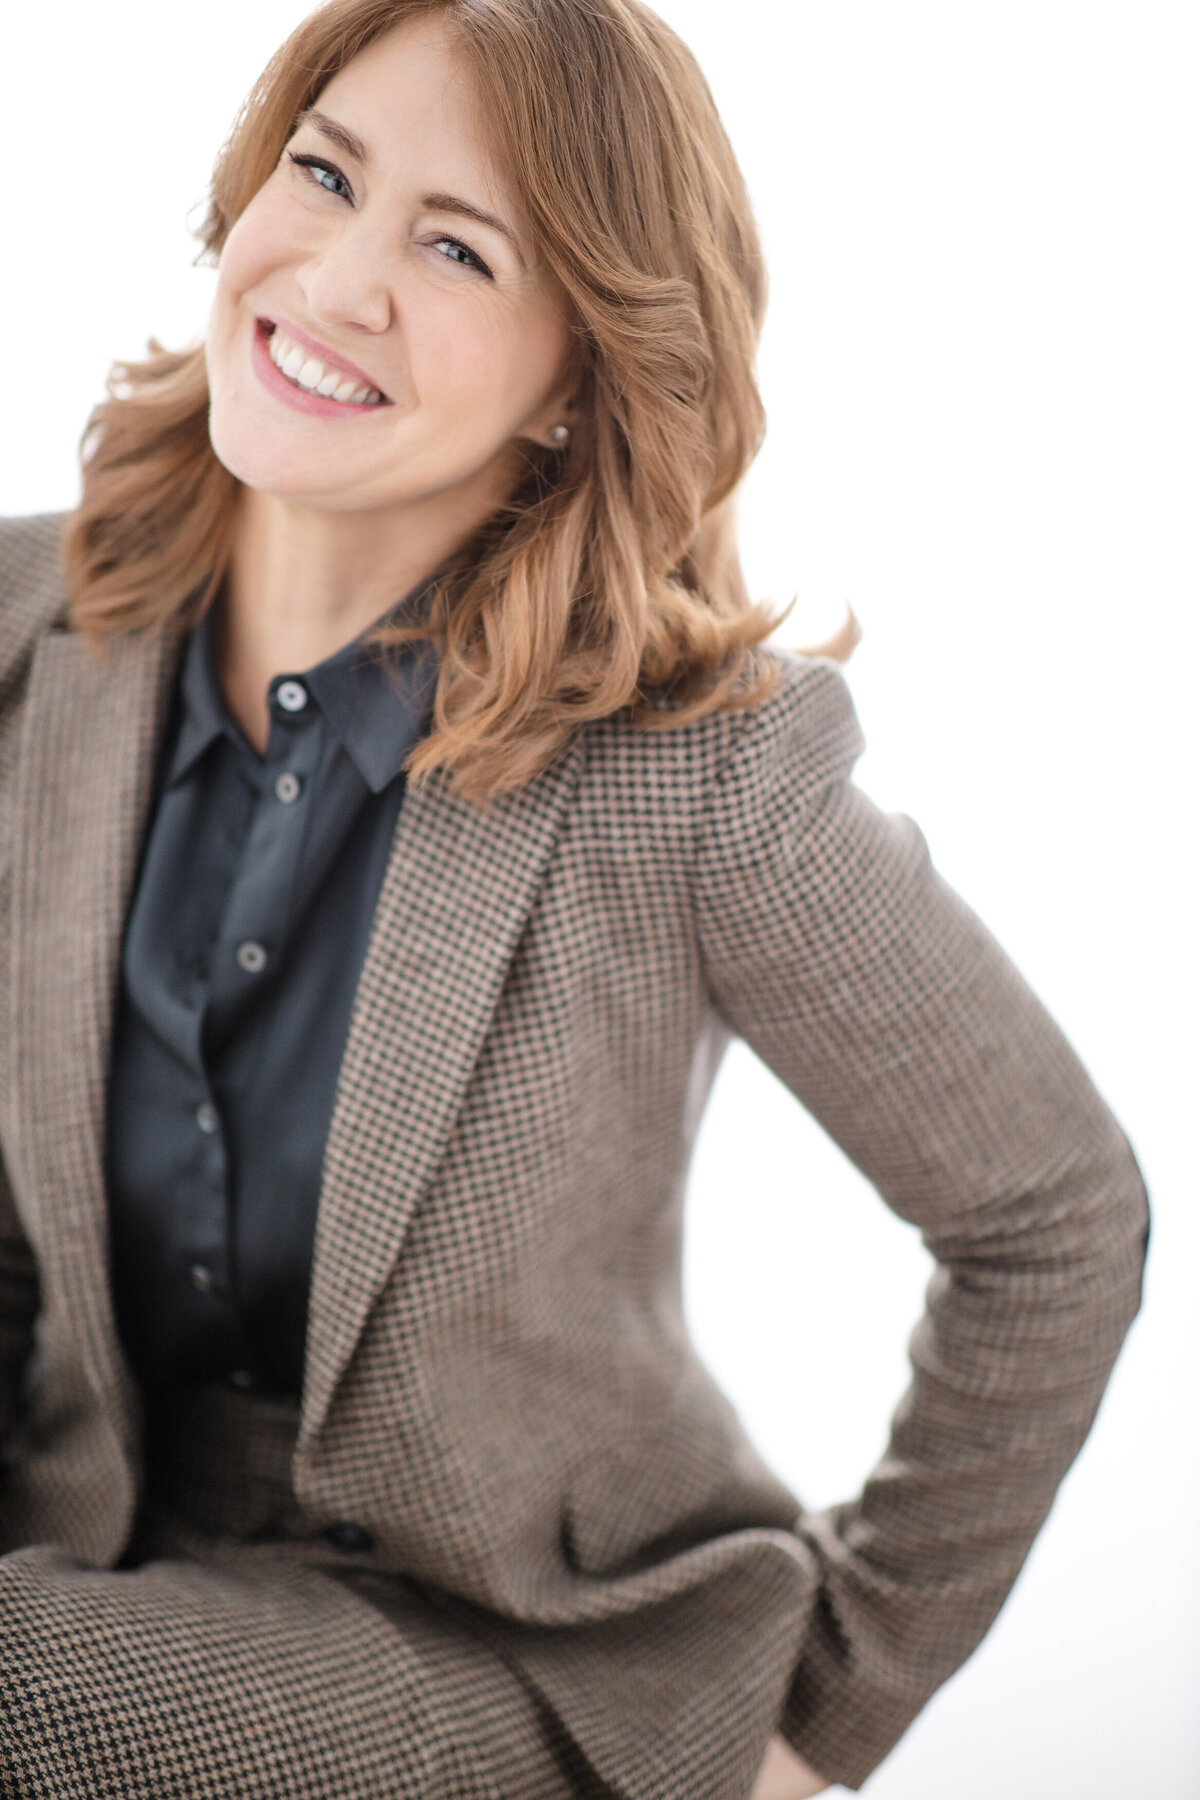 A woman in a blazer with her hand on her hip smiling.